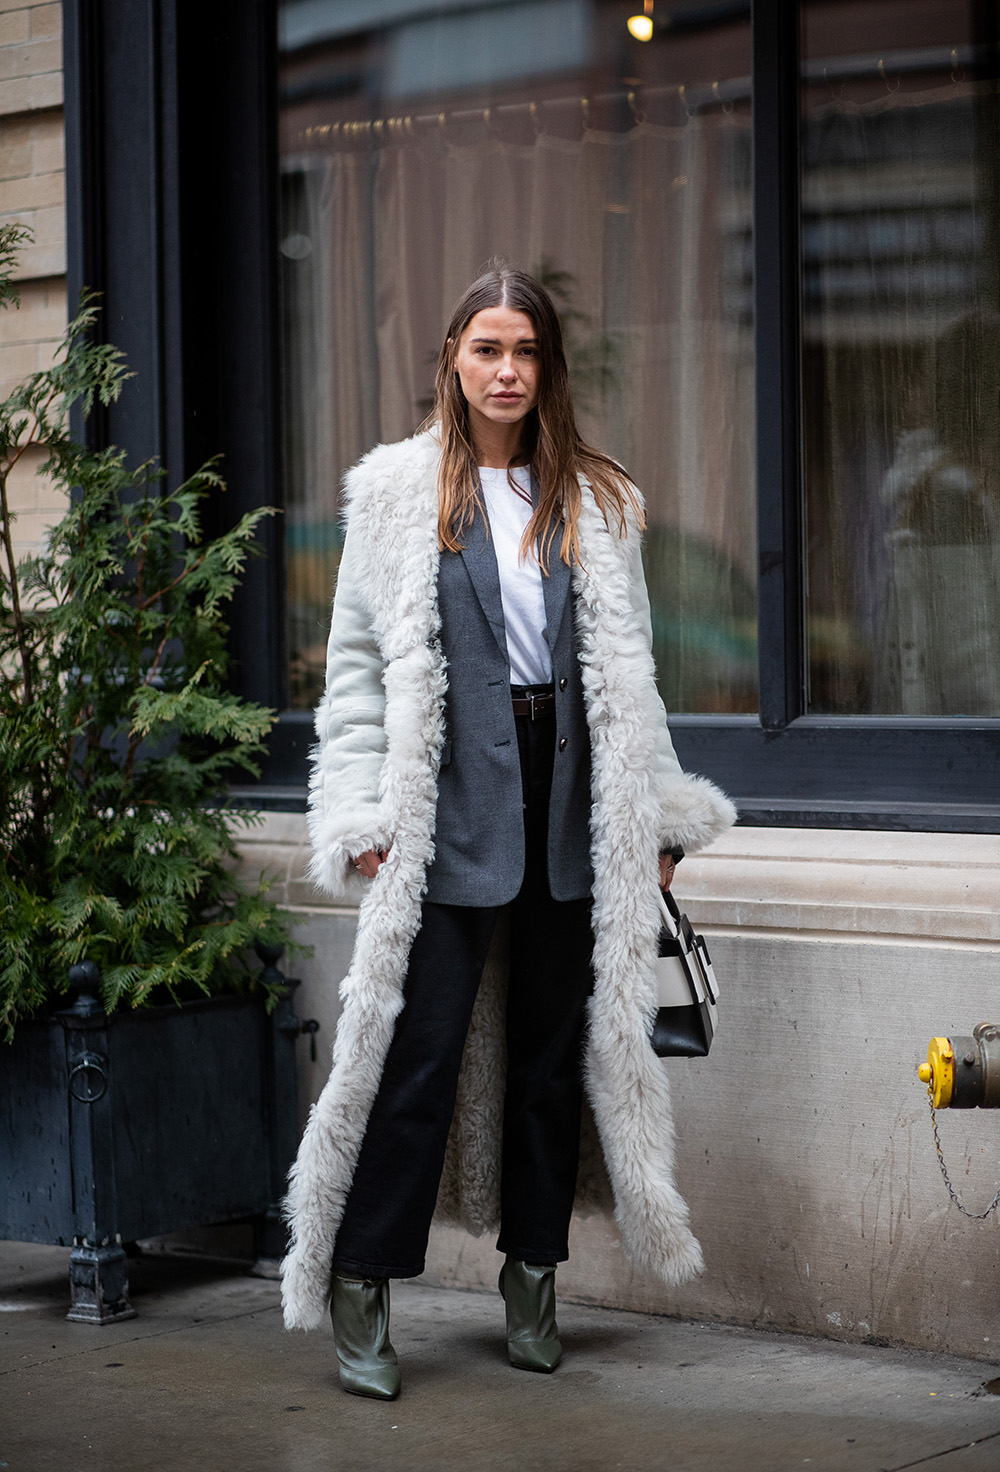 NEW YORK, NEW YORK - FEBRUARY 08: Sophia Roe is seen wearing shearling coat, black white bag outside Nanushka during New York Fashion Week Autumn Winter 2019 on February 08, 2019 in New York City. (Photo by Christian Vierig/Getty Images)